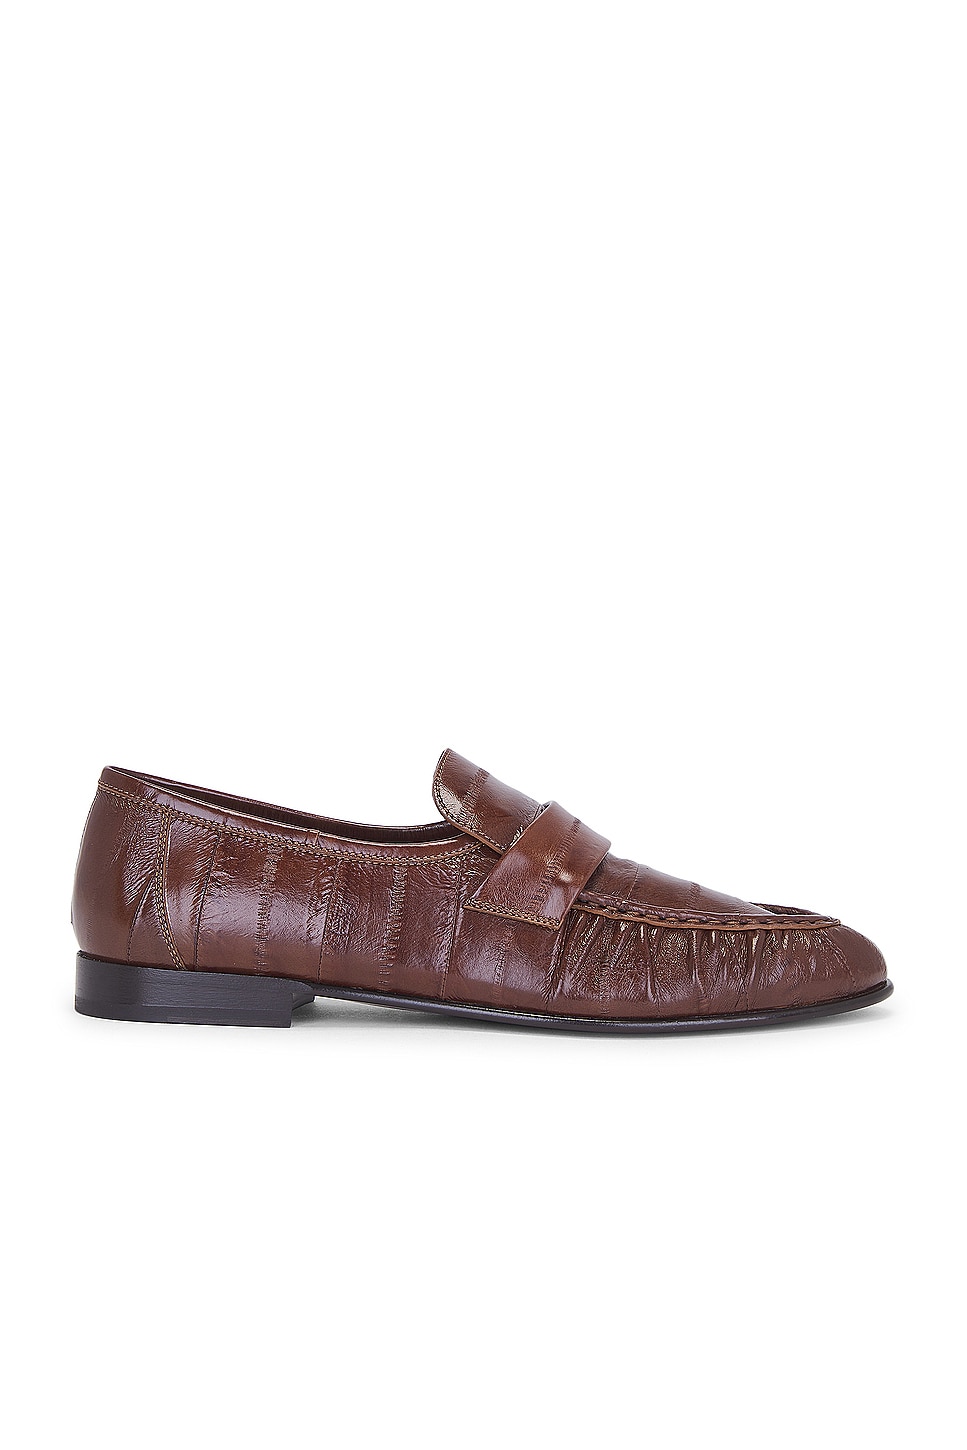 Image 1 of The Row Soft Loafer in Light Brown